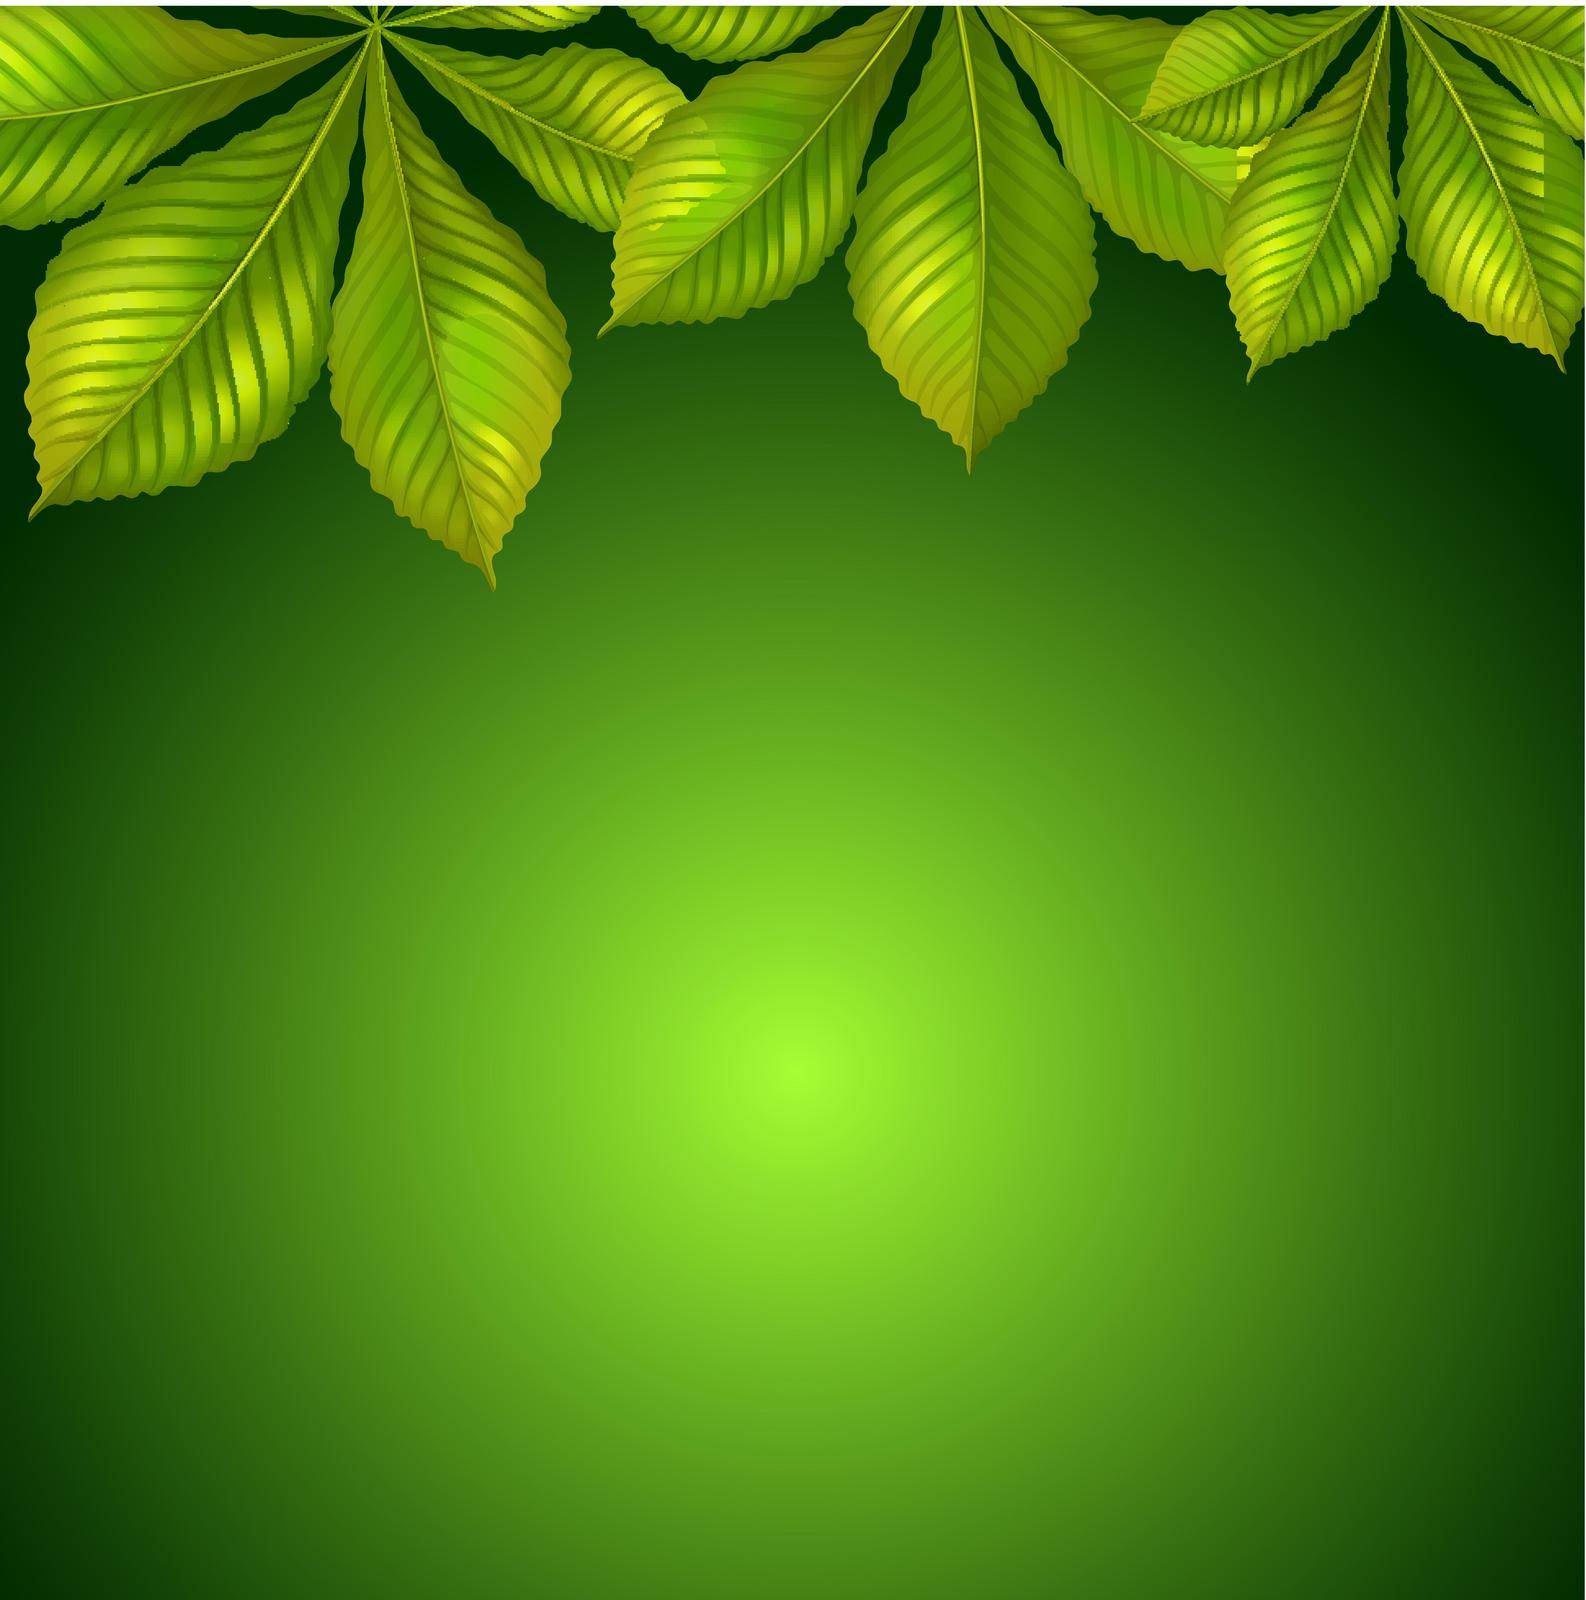 A green background by iimages